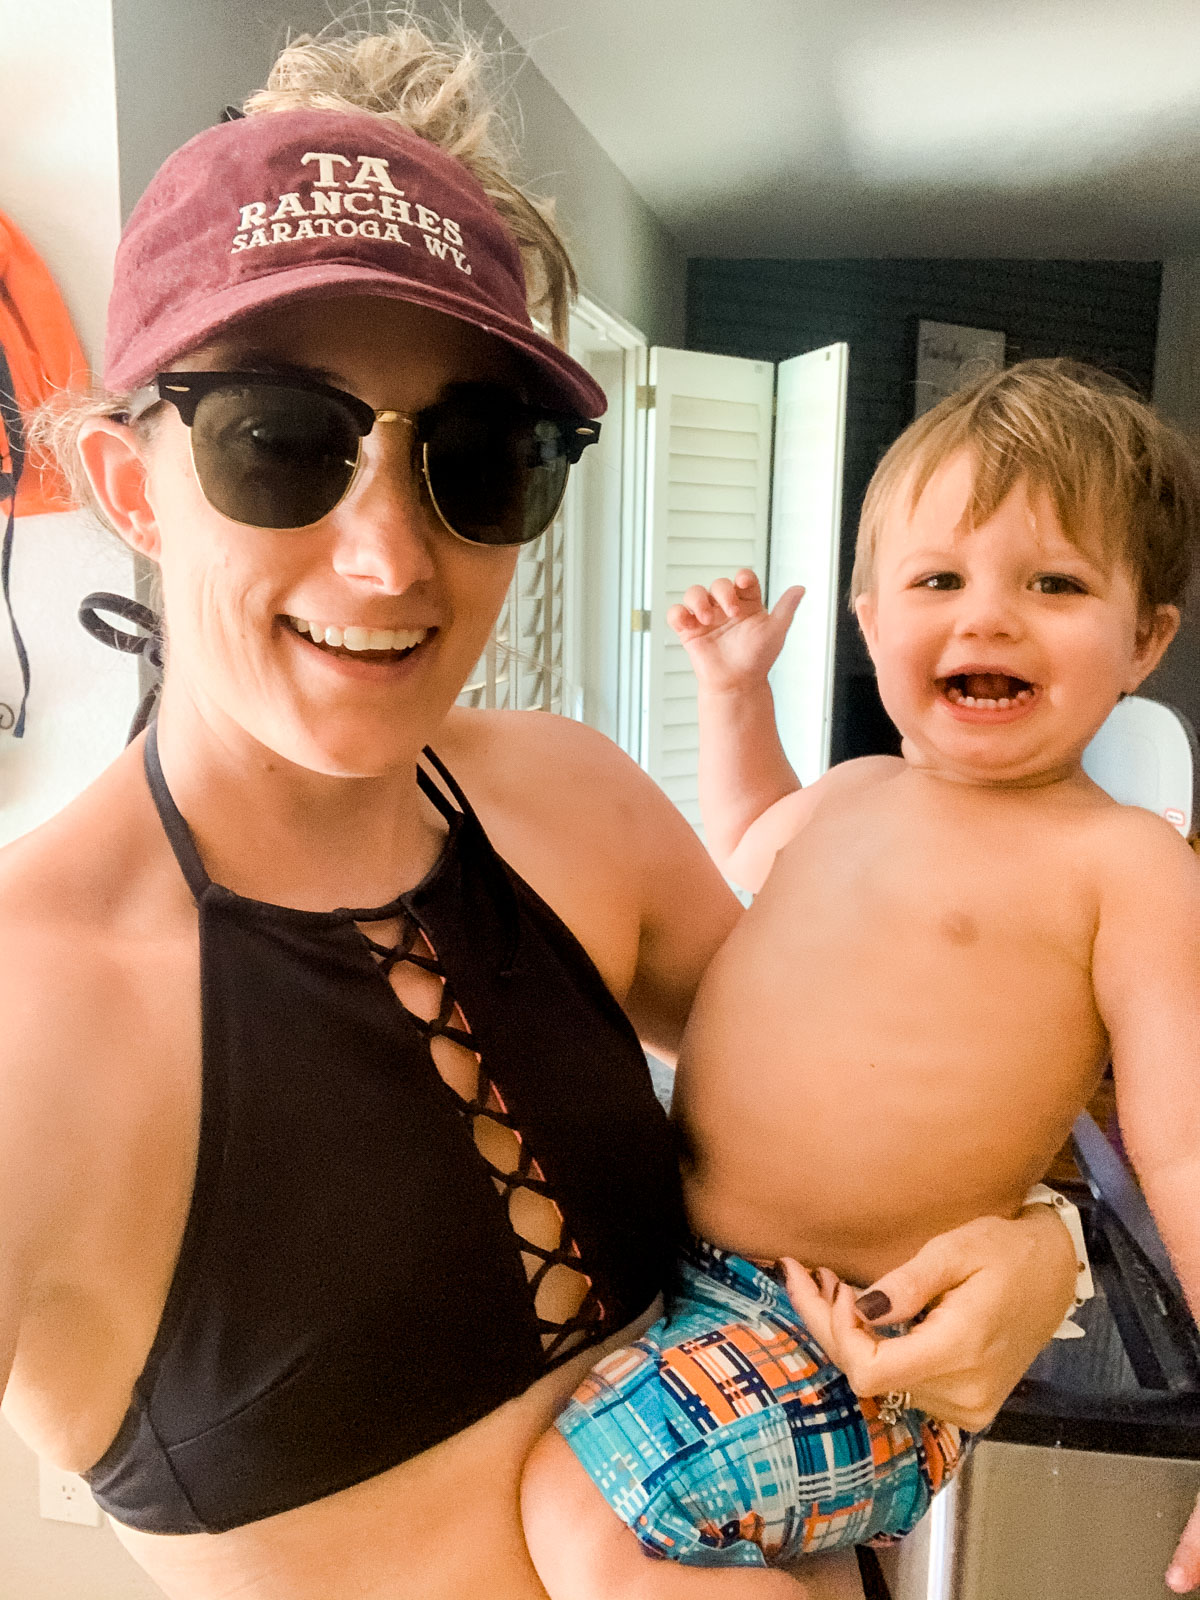 mom with swim suit top on and vvisor holding toddler both are smiling